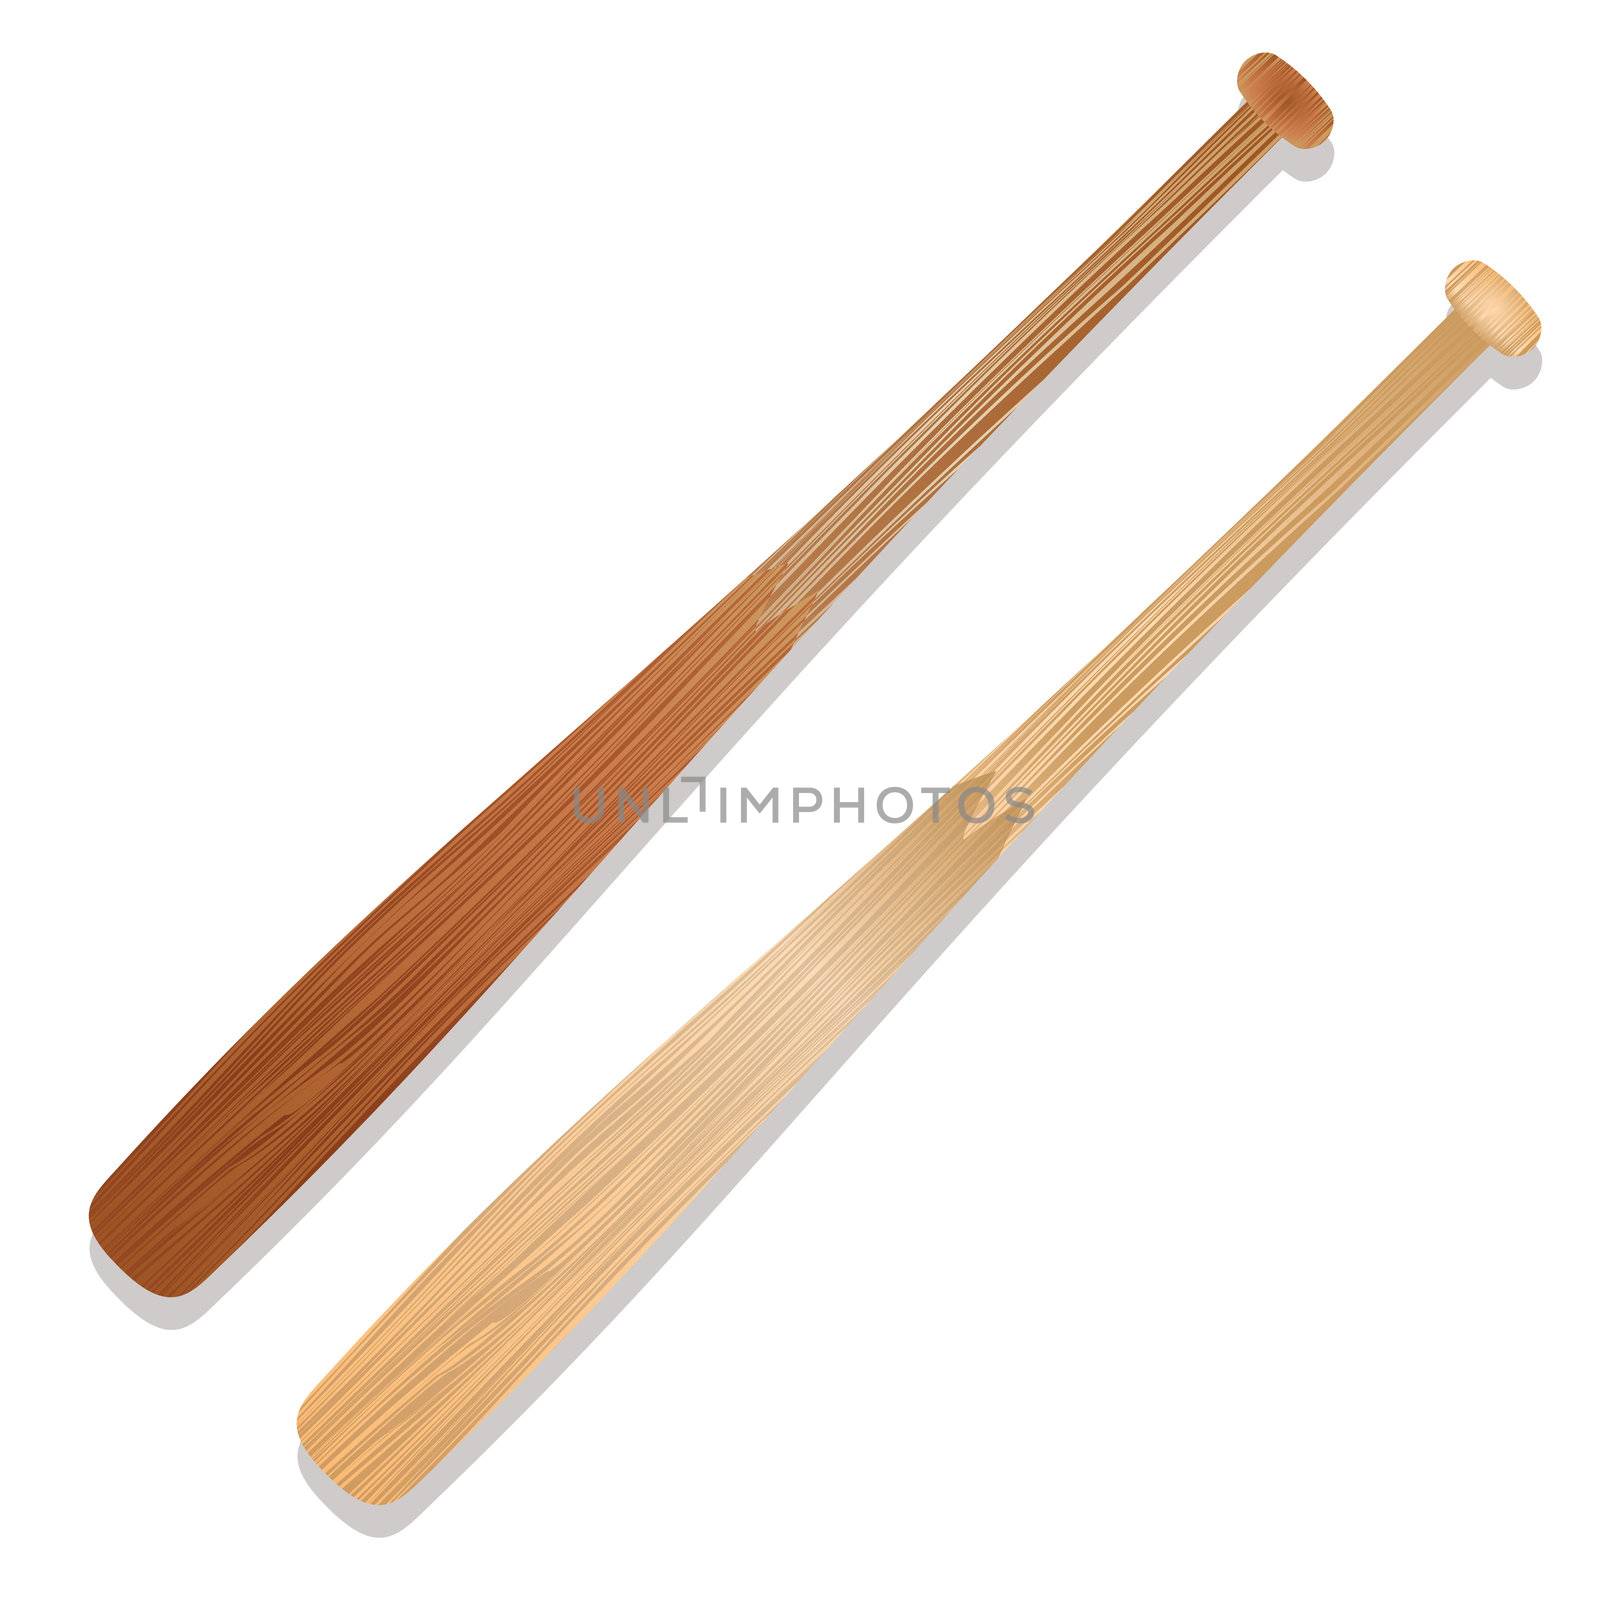 Two illustrated baseball bats with shadow and wood grain